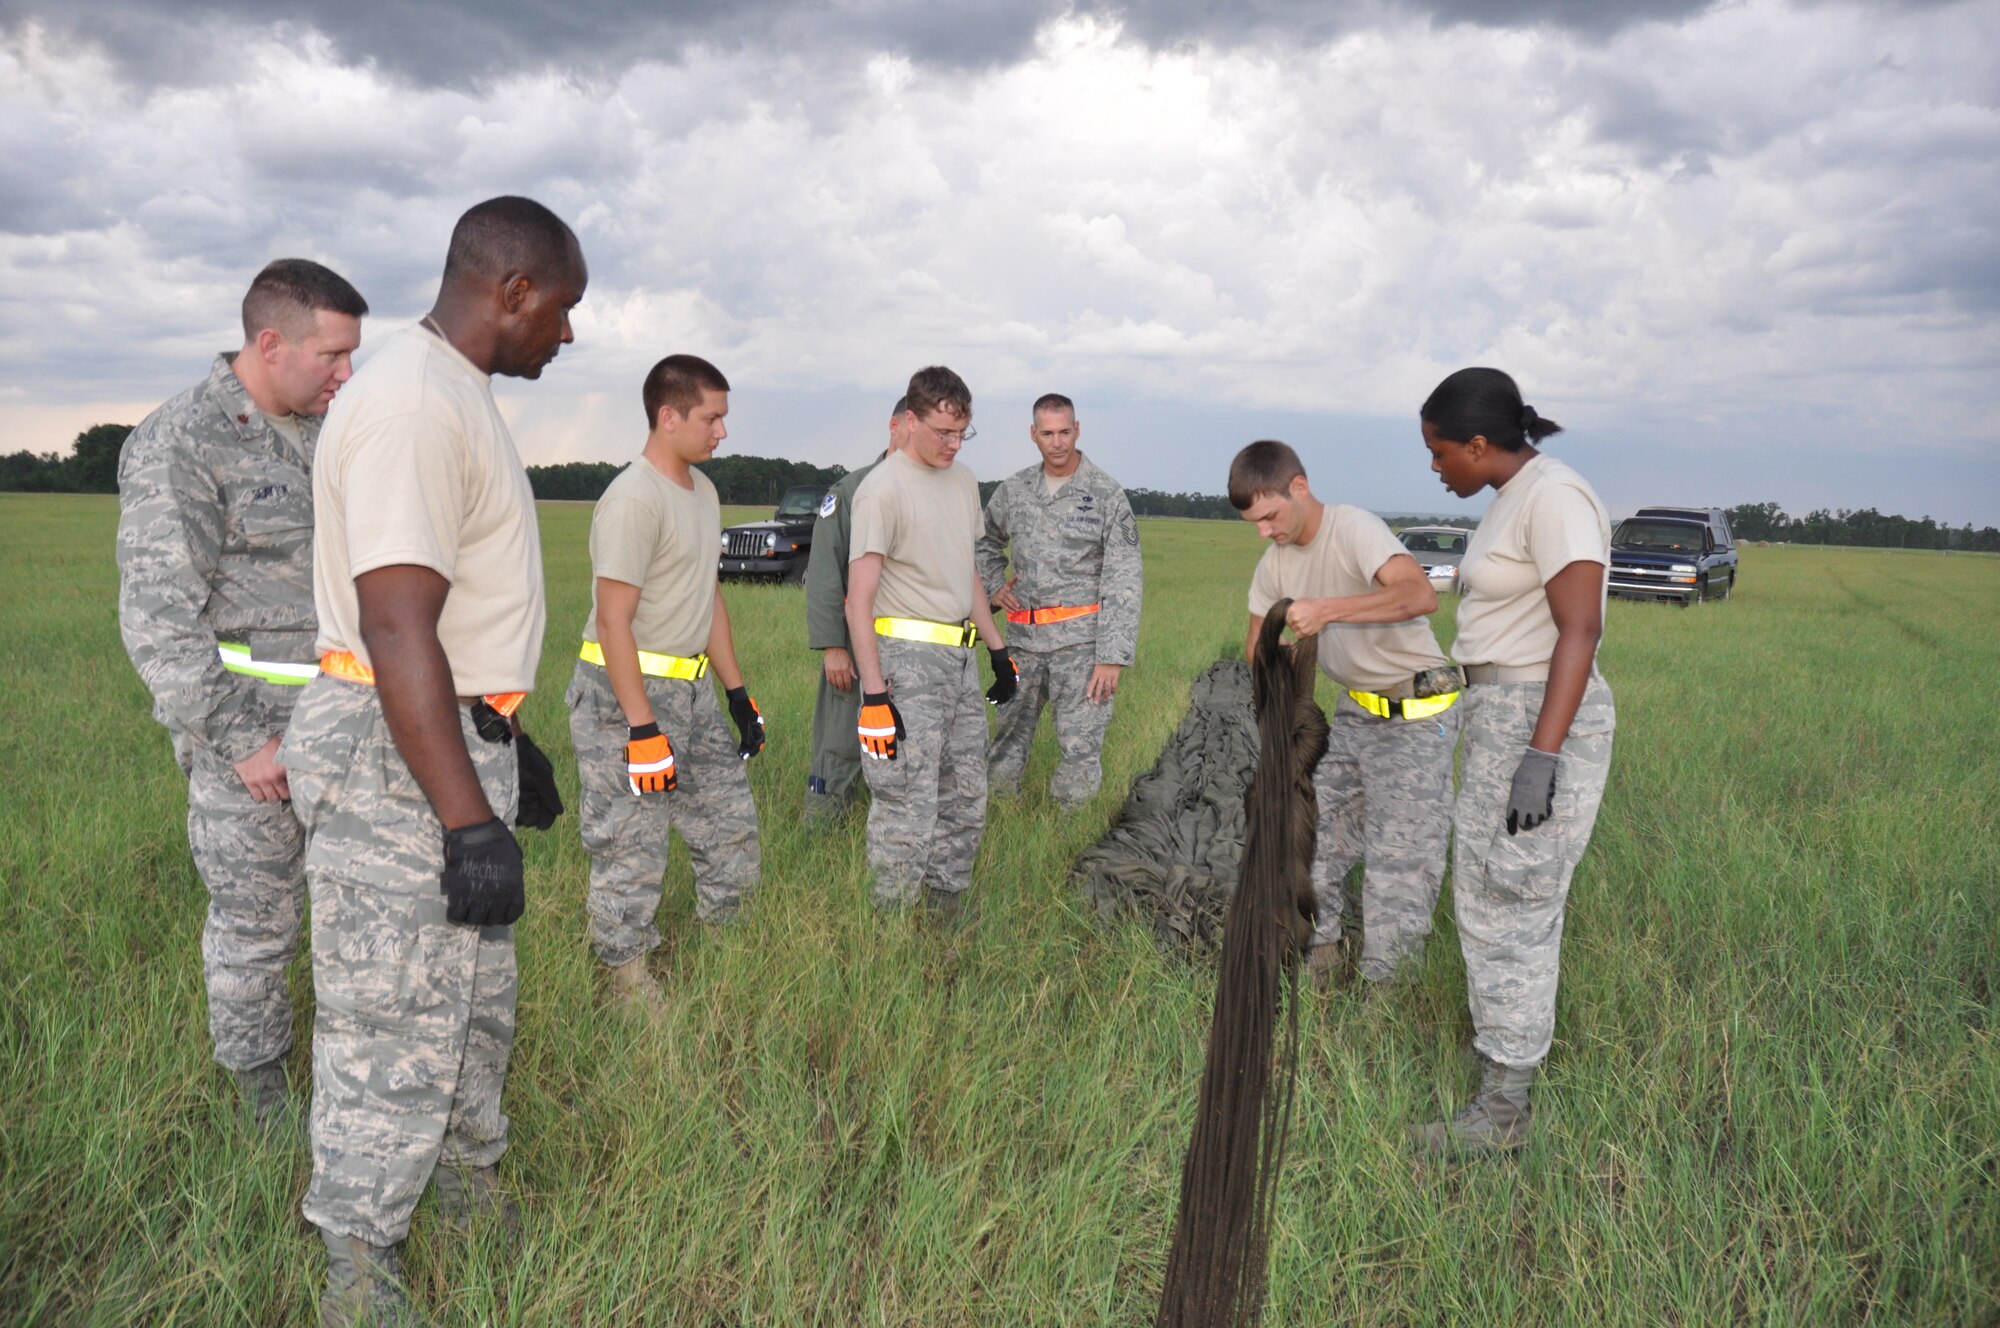 Tech. Sgt. Neal Moore, second from right, demonstrates the proper technique for field packing a parachute to new members of the 25th Aerial Port Squadron.